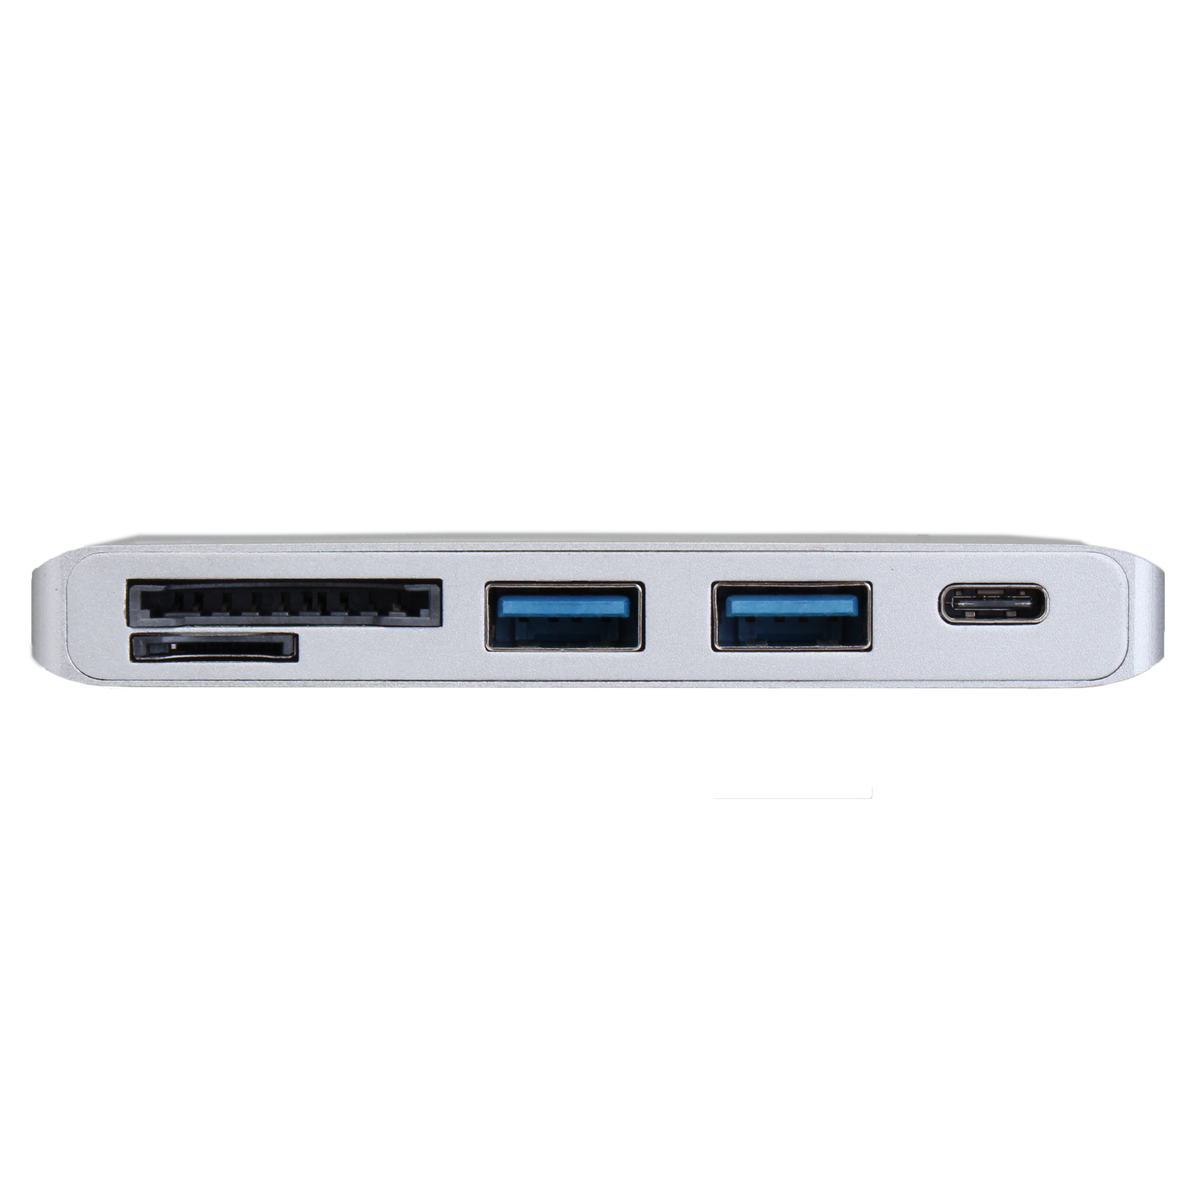 Multifunction USB Hub Type-C to Type-C USB 3.0 2Ports TF SD Card Reader for Laptop PC 16